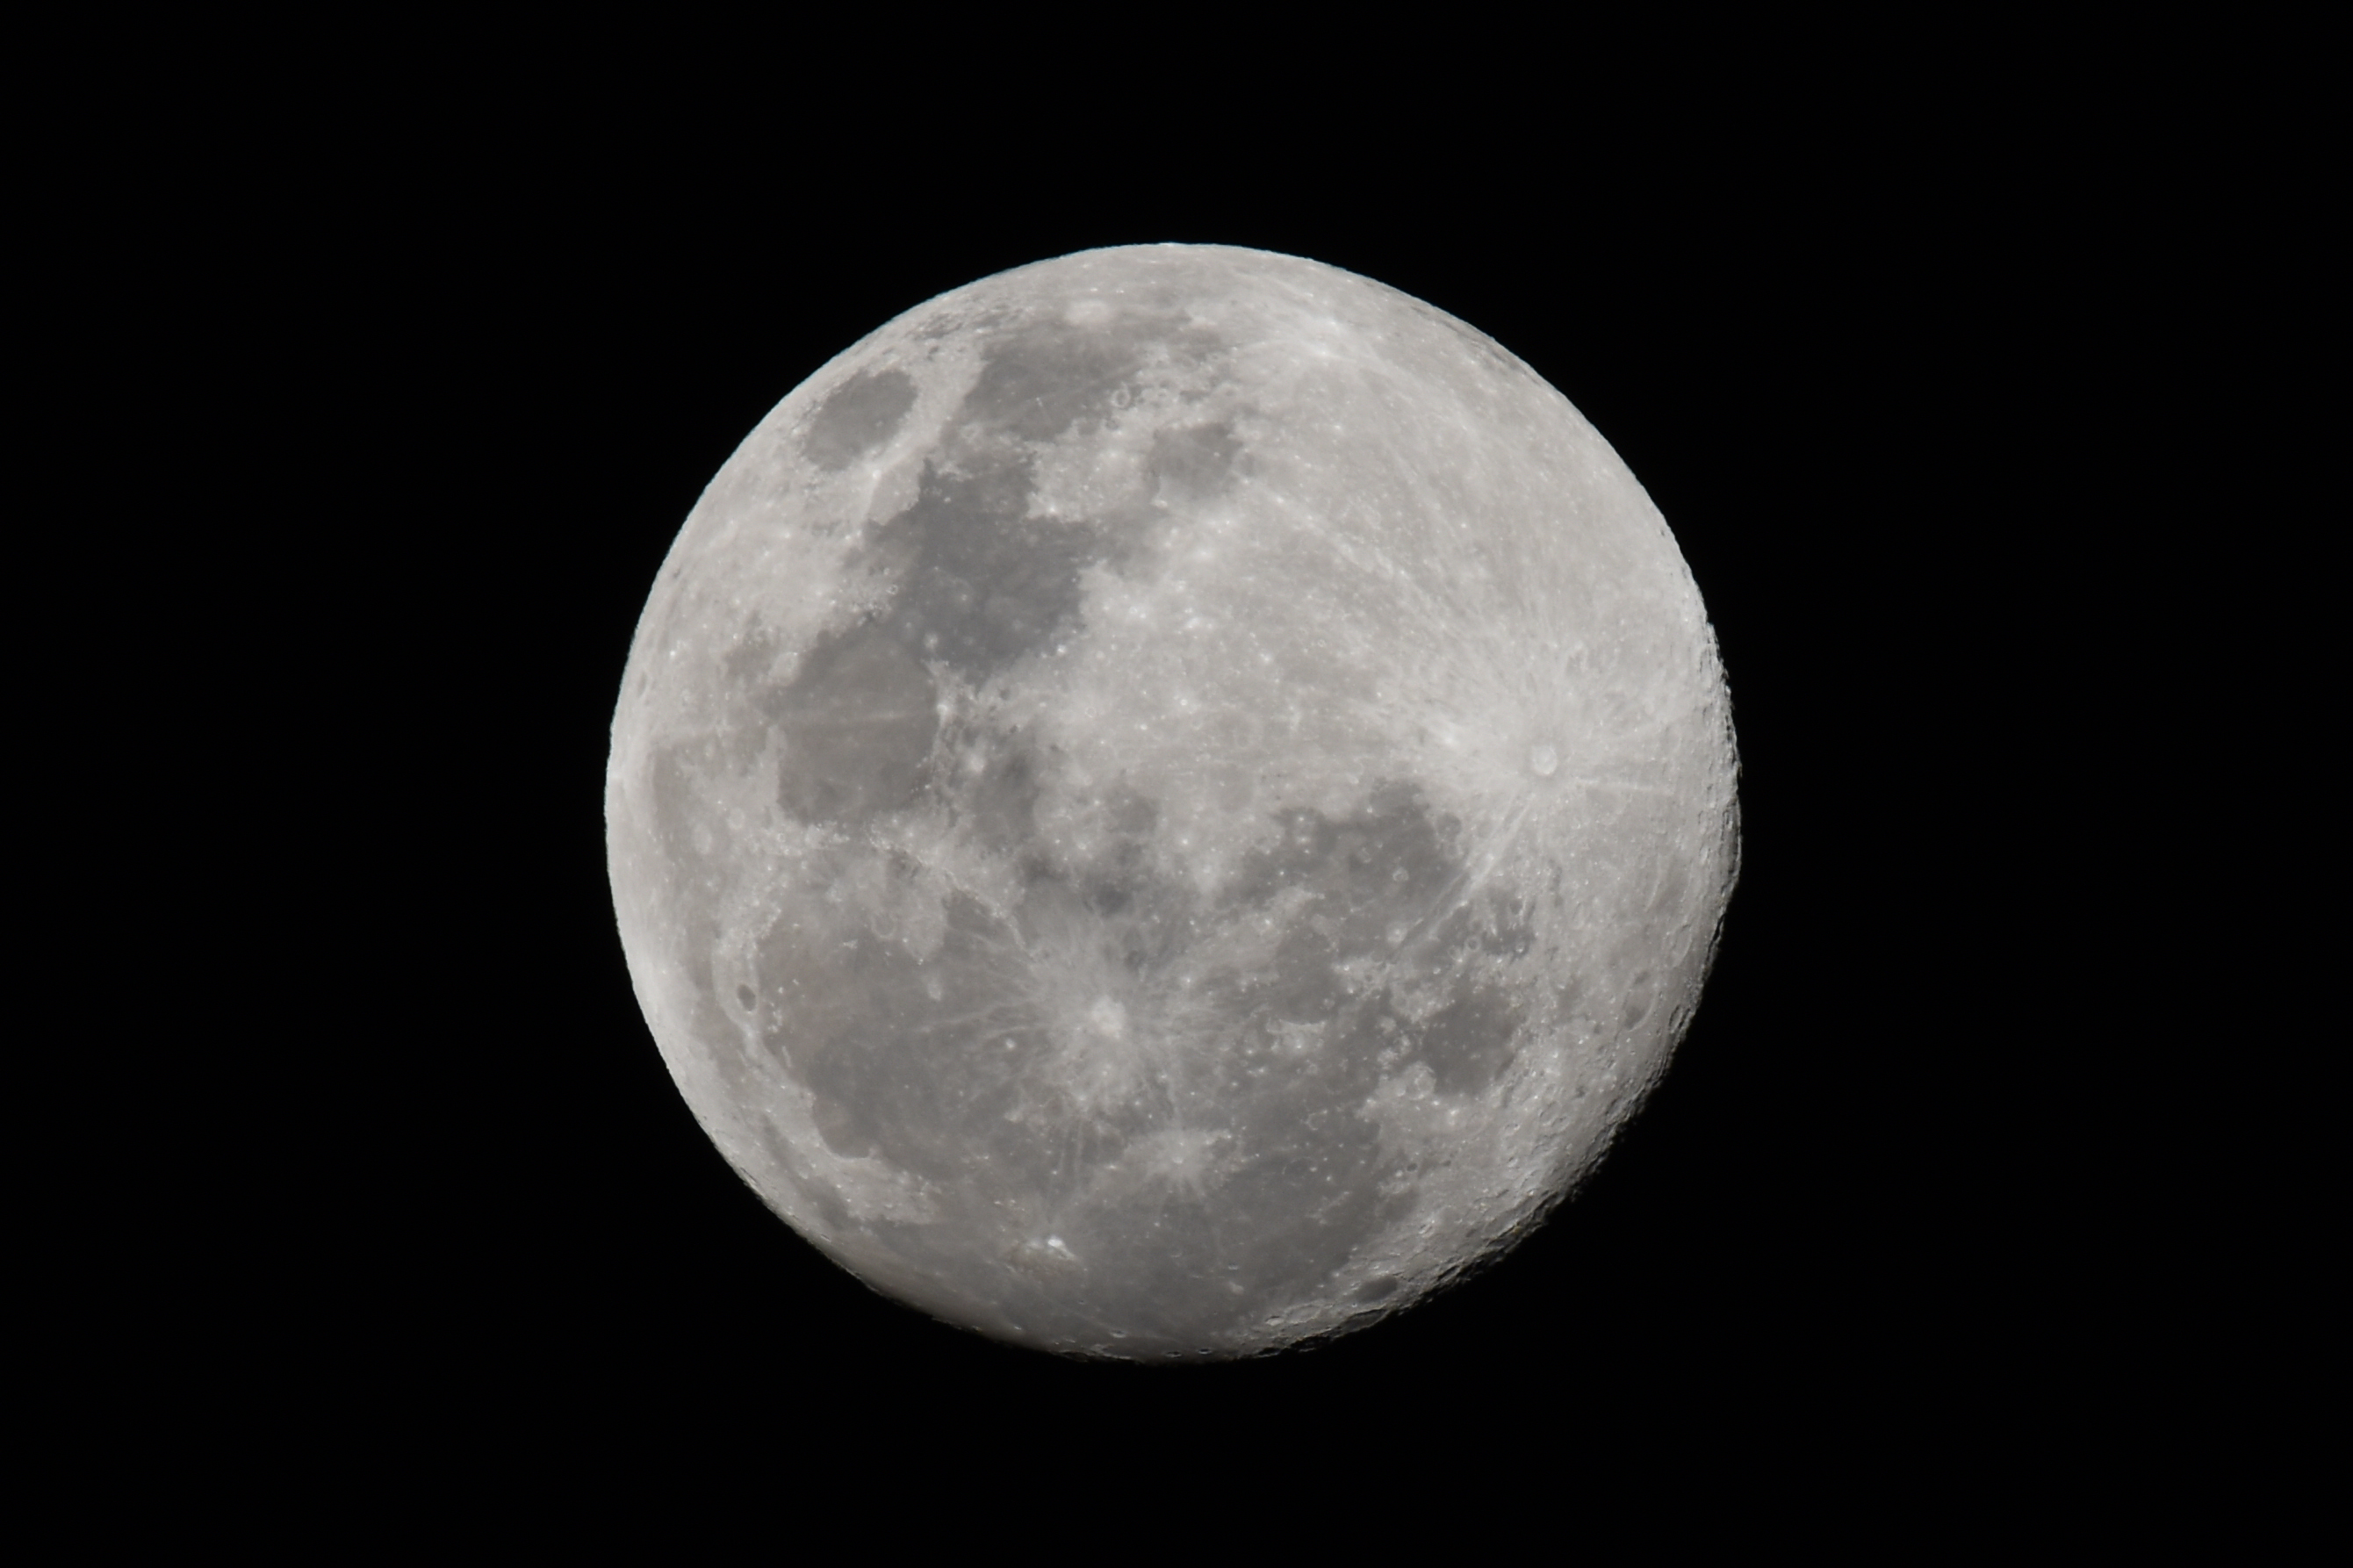 A clear photo of the moon on a black background